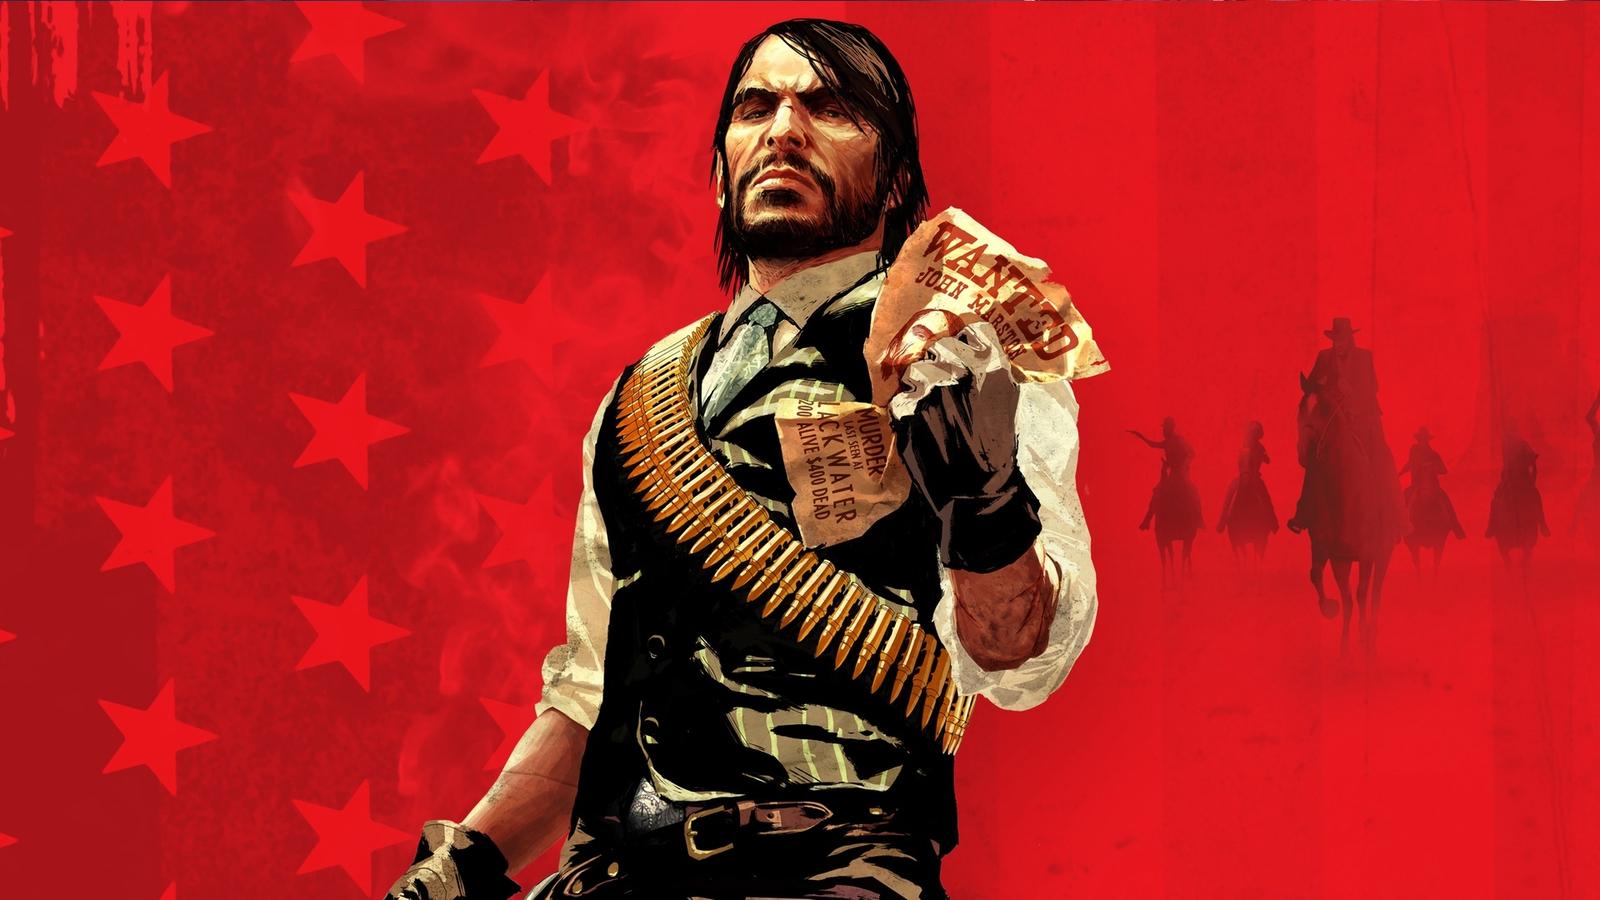 Red Dead Redemption John Marston holding his own wanted poster